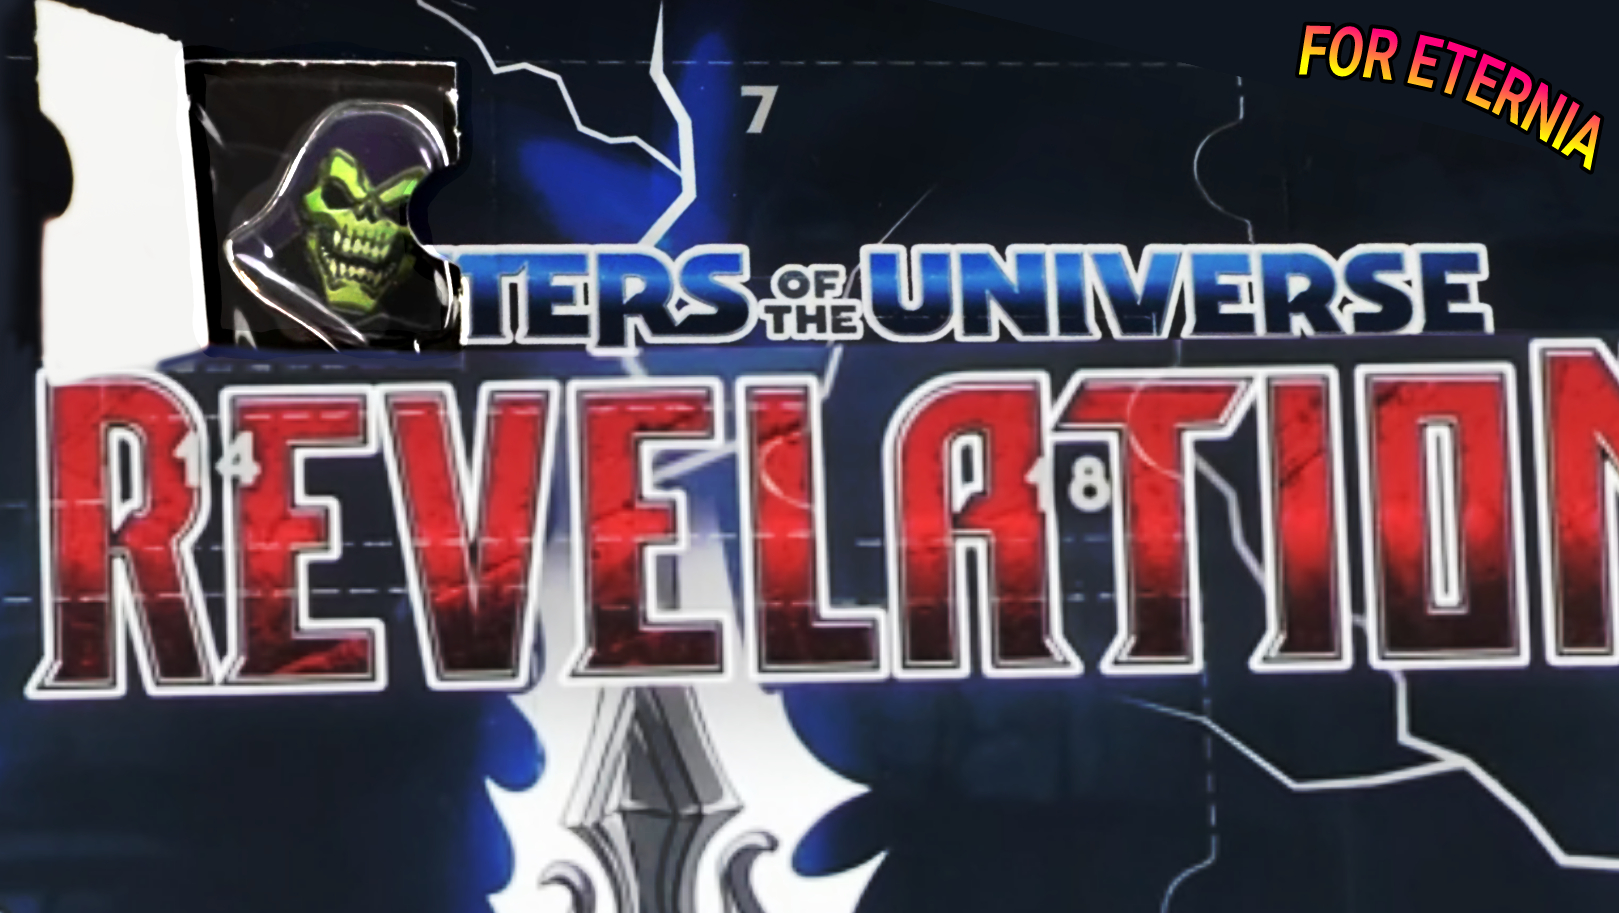 Taking a Sneak Peek at the contents of the ”Masters of the Universe: Revelation” Christmas Advent Calendar by CineReplicas